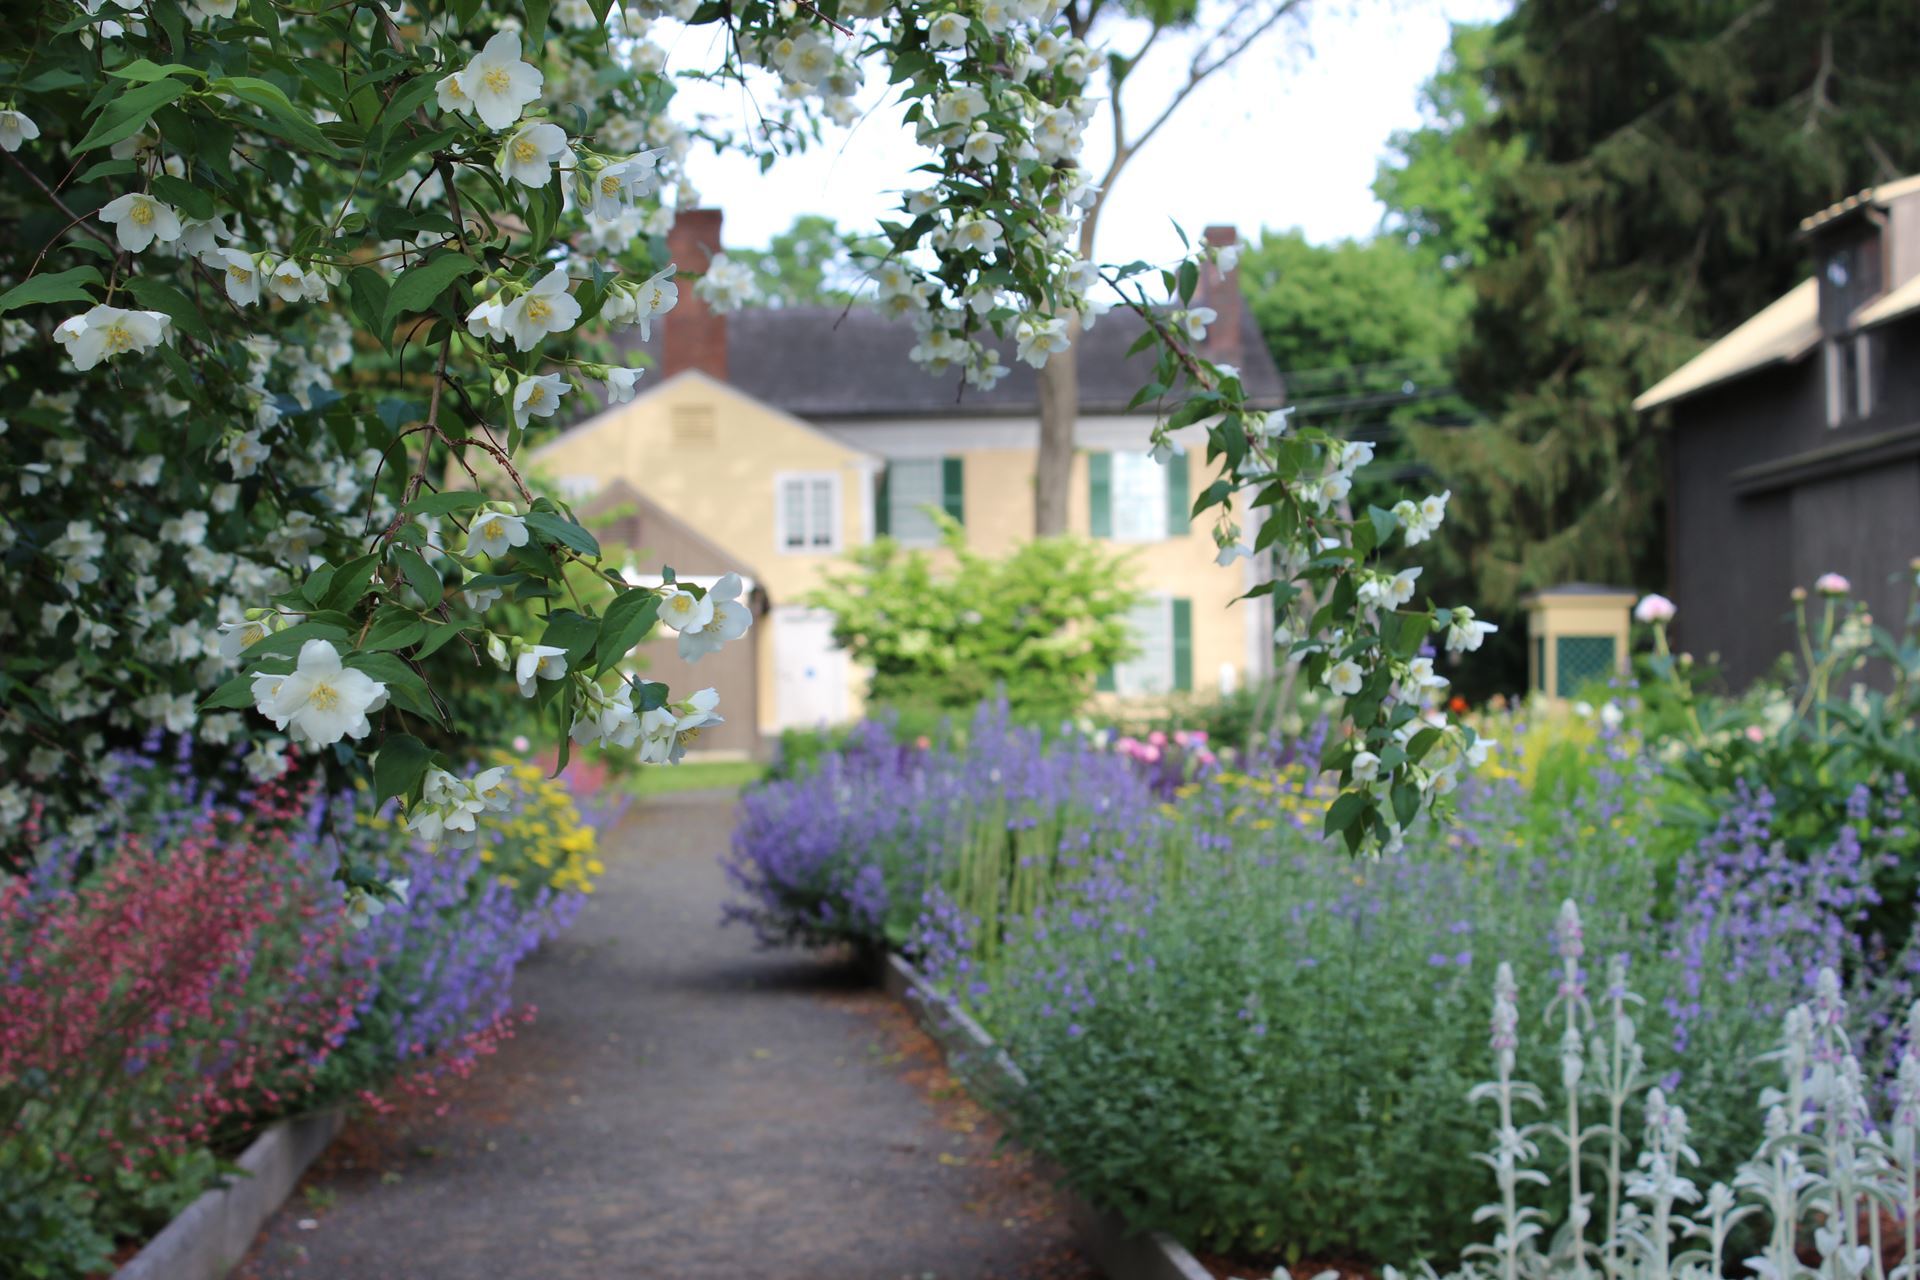 Gardens at the Florence Griswold Museum